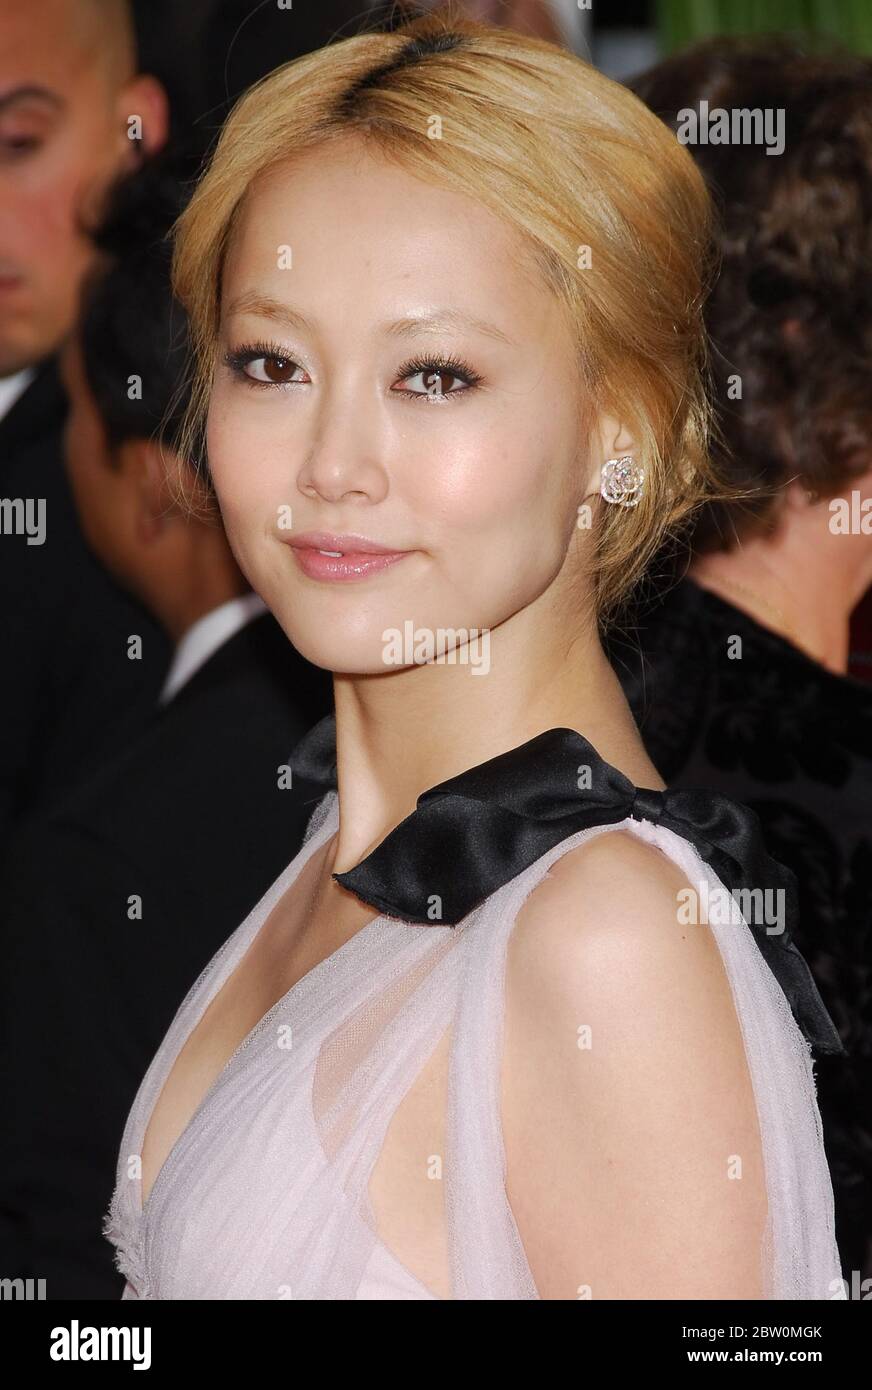 Rinko Kikuchi at the 64th Annual Golden Globe Awards - Arrivals held at The Beverly Hilton in Beverly Hills, CA. The event took place on Monday, January 15, 2007.   Photo by: SBM / PictureLux - File Reference # 34006-1507SBMPLX Stock Photo